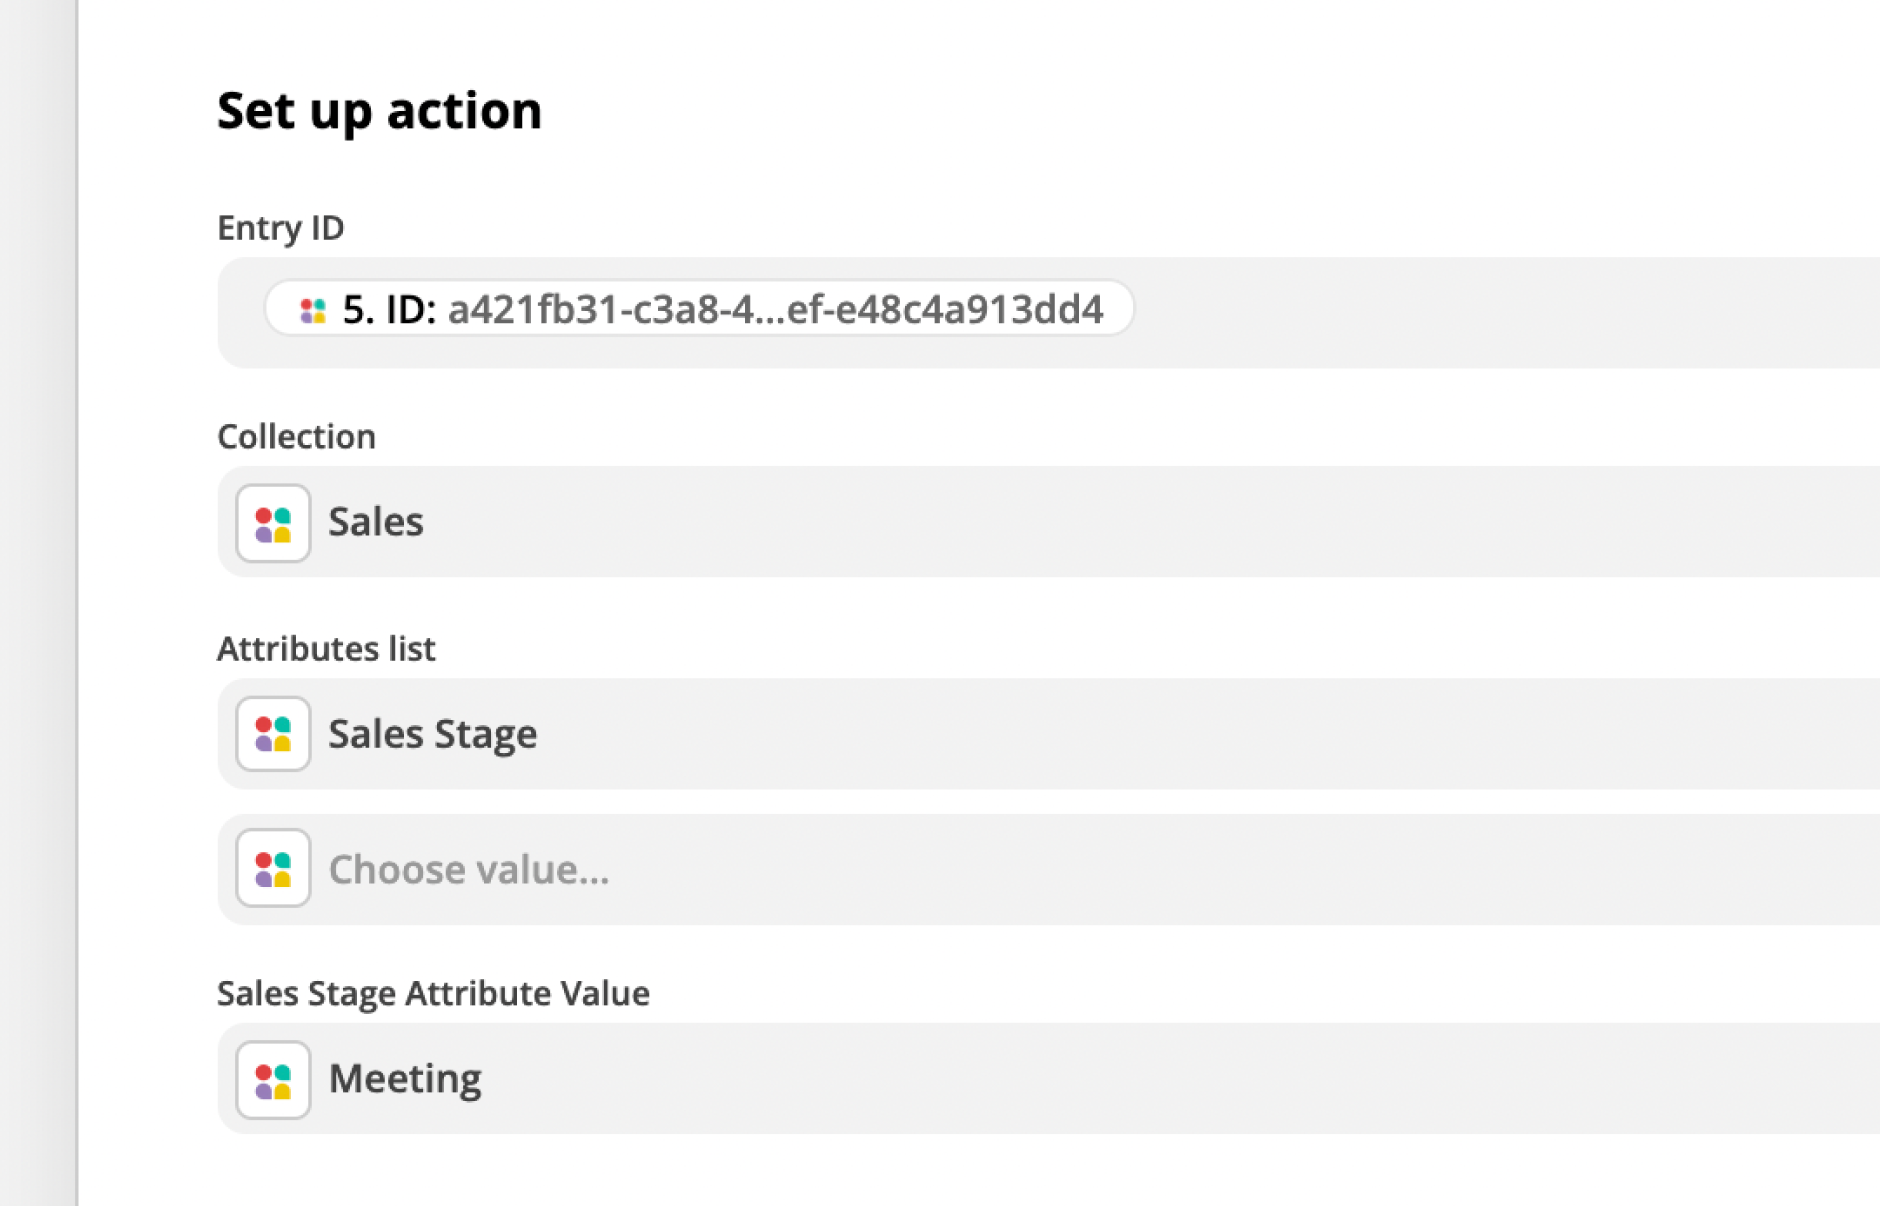 The Set up action window in Zapier. These completed fields tell Zapier which list to create an entry in (Sales) and which kanban stage (Meeting) to move them to.